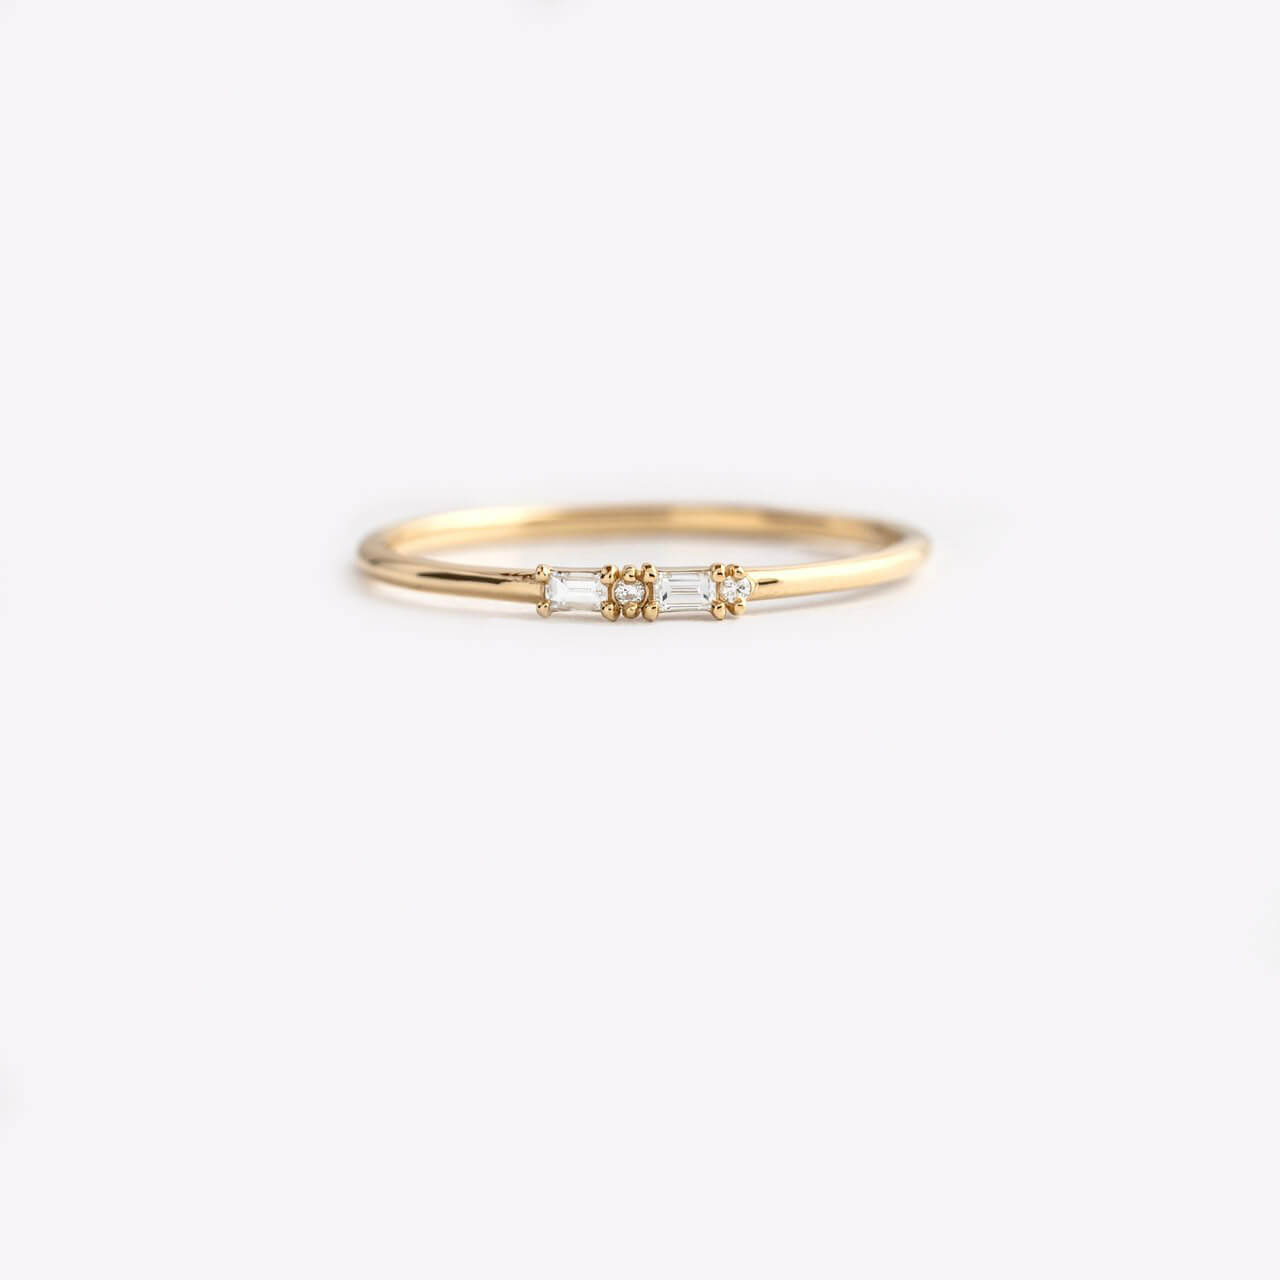 Morse Code Ring, Yellow Gold - Letter "C"